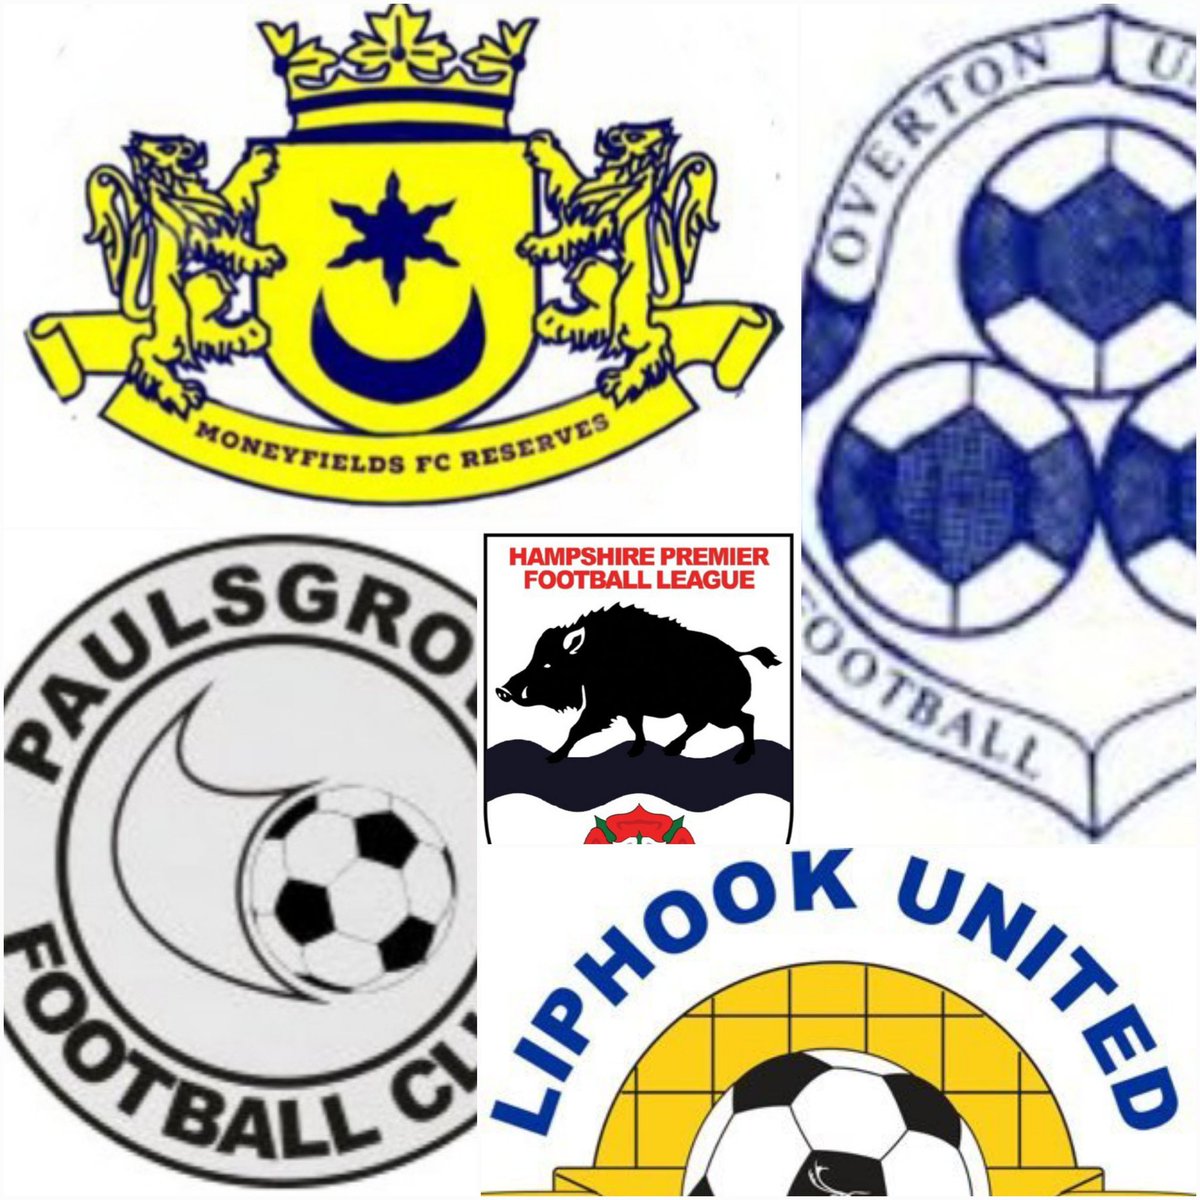 ⚽️ Tues Matchday ⚽️
@HantsLeague #Senior

All the best this evening  to @PaulsgroveFC (h) 6.30pm + @MONEYFIELDSFC Res (h) 8pm at #Westleigh 👍

#UTG #UpTheMoneys